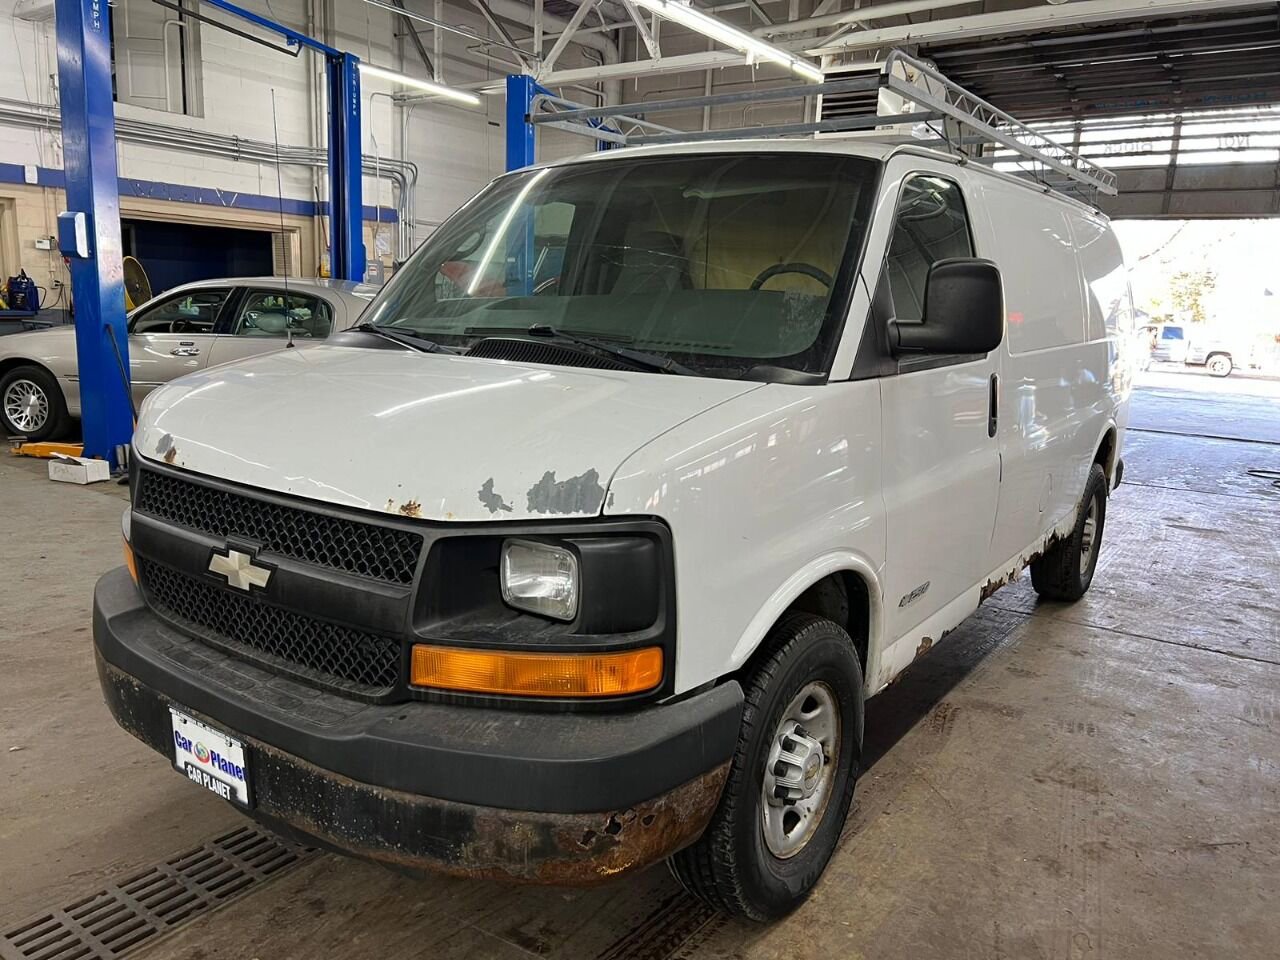 Used 2004 Chevrolet Express 2500 for Sale Right Now - Autotrader